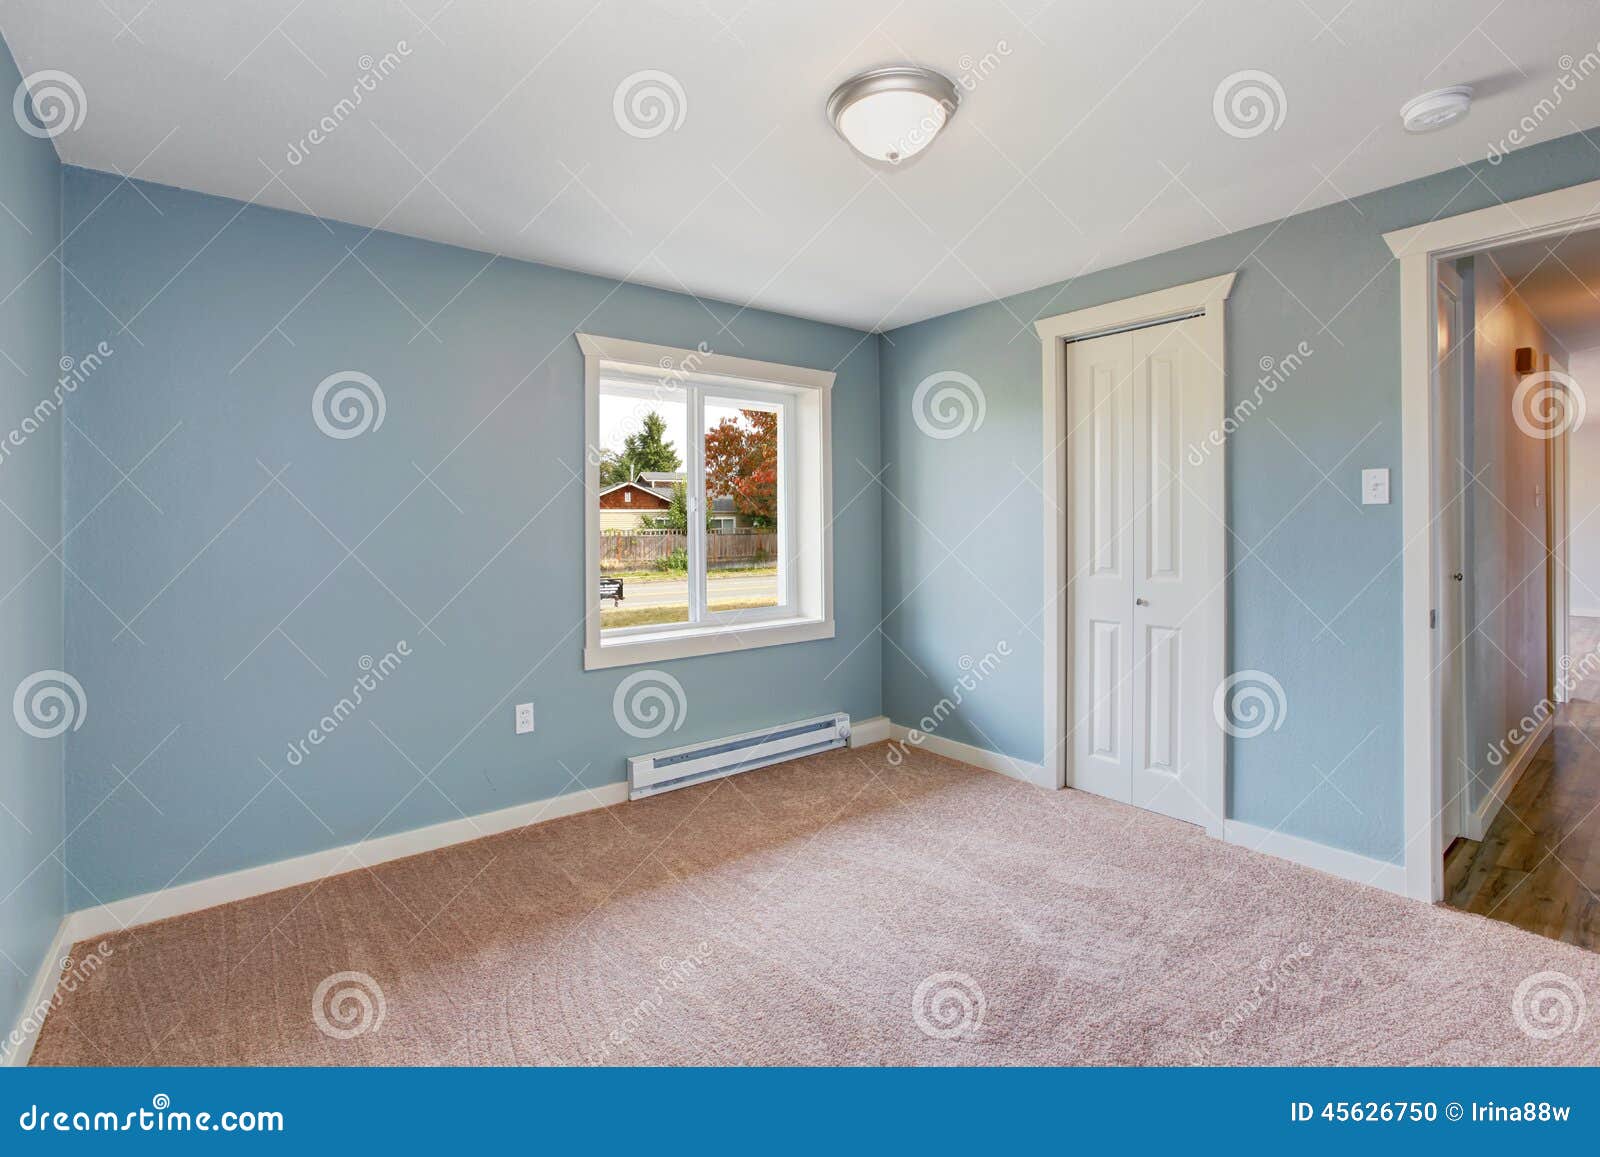  Light  Blue Bedroom  With Closets Stock Photo Image of 